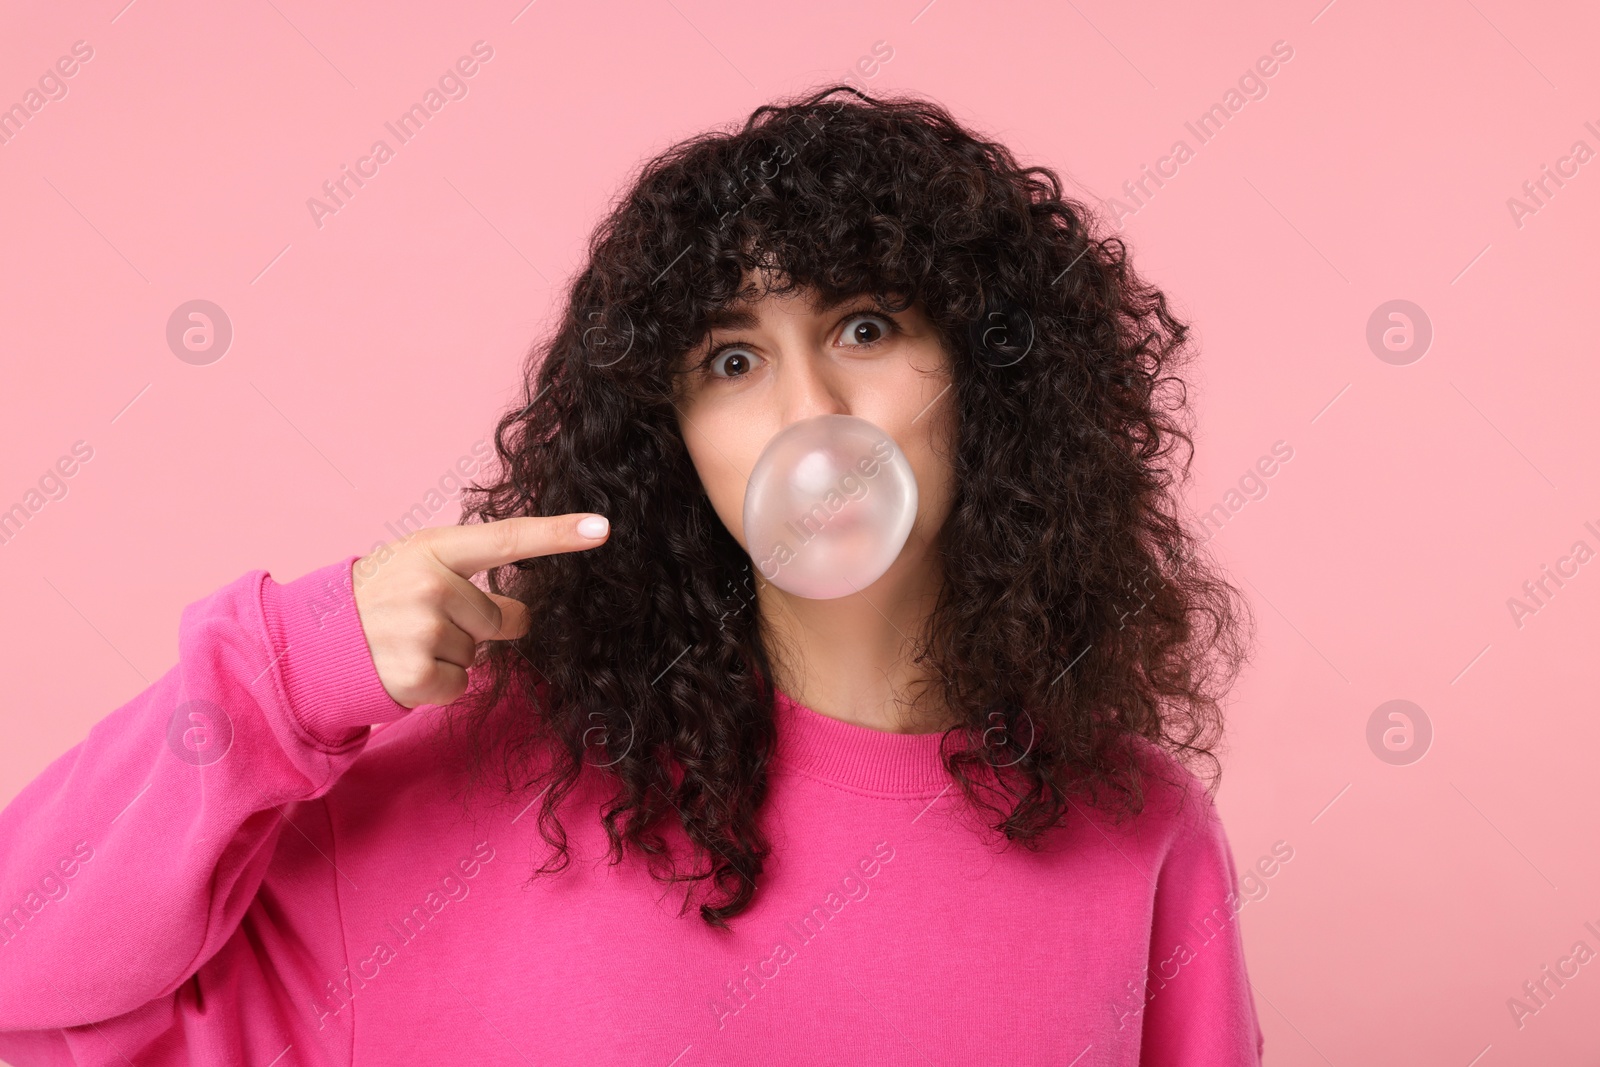 Photo of Beautiful young woman blowing bubble gum on pink background